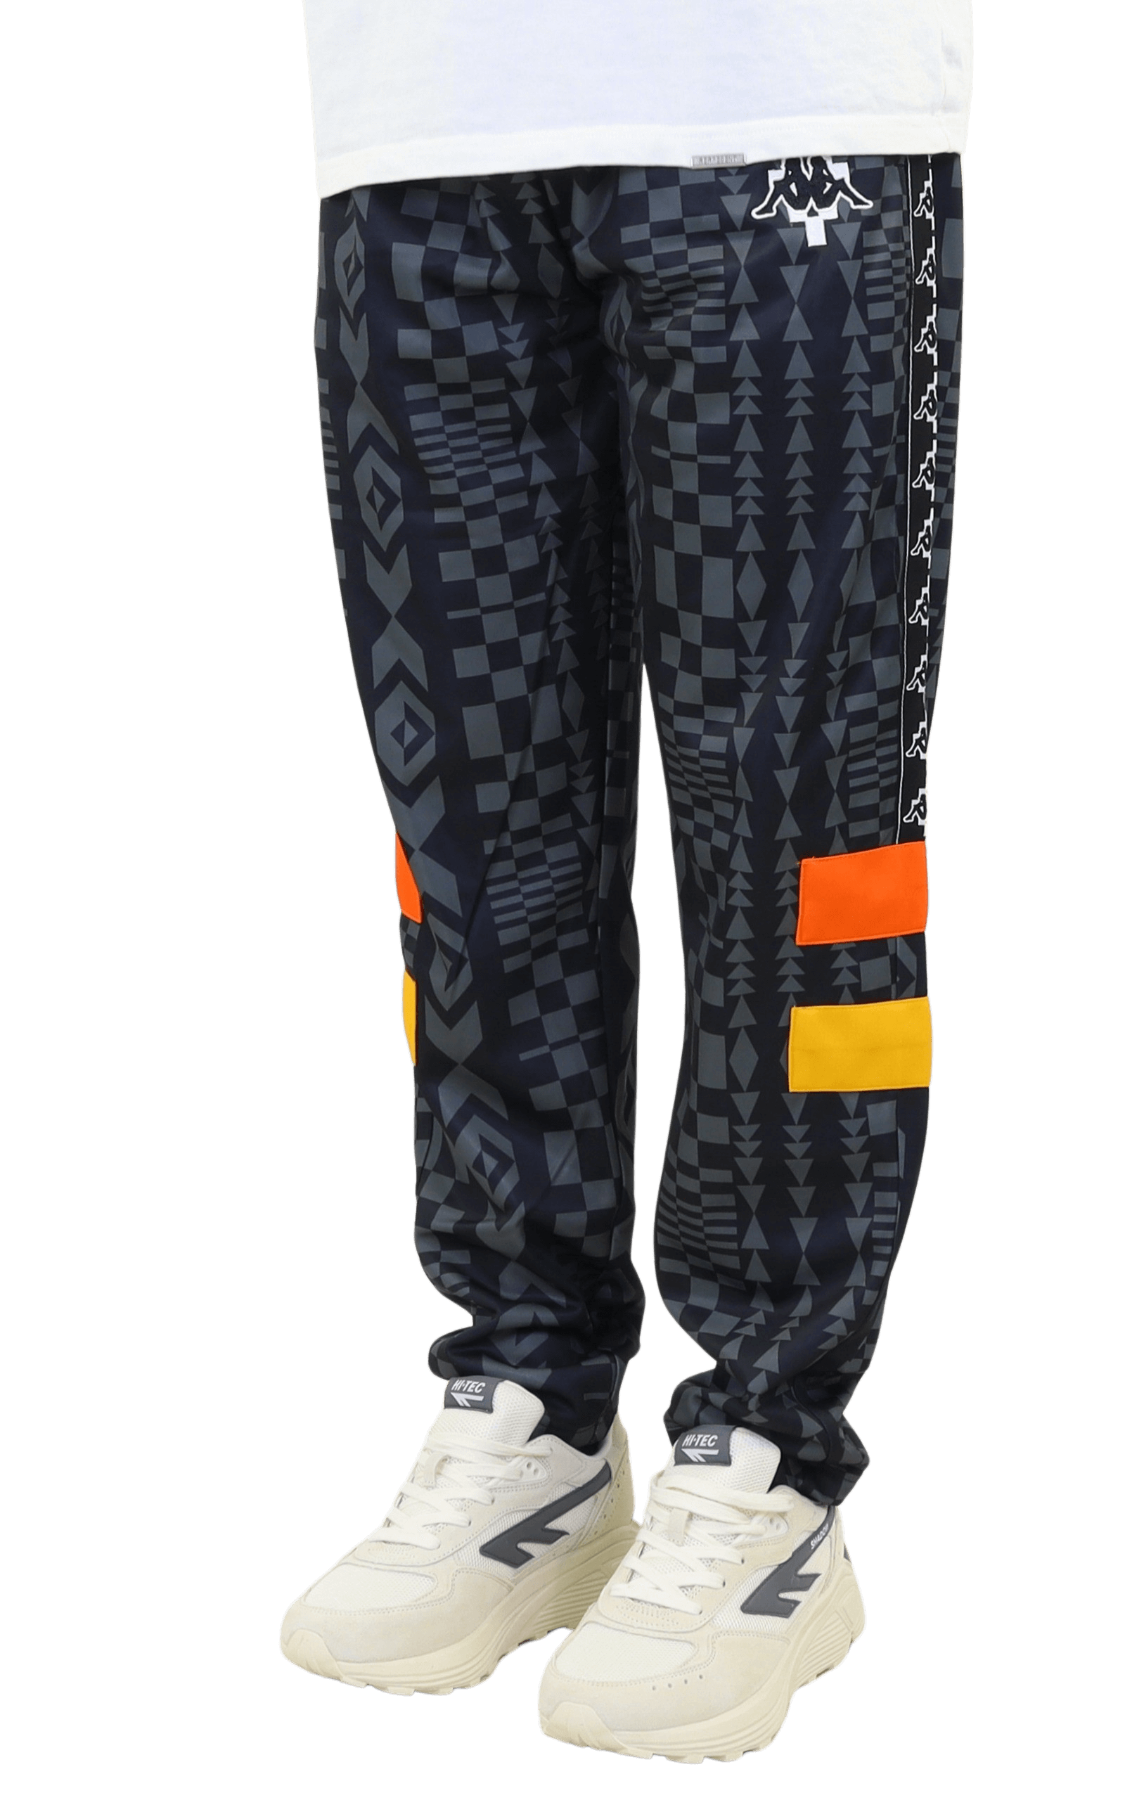 Kappa Active Banded Track Pants In Green/ Blue | ModeSens